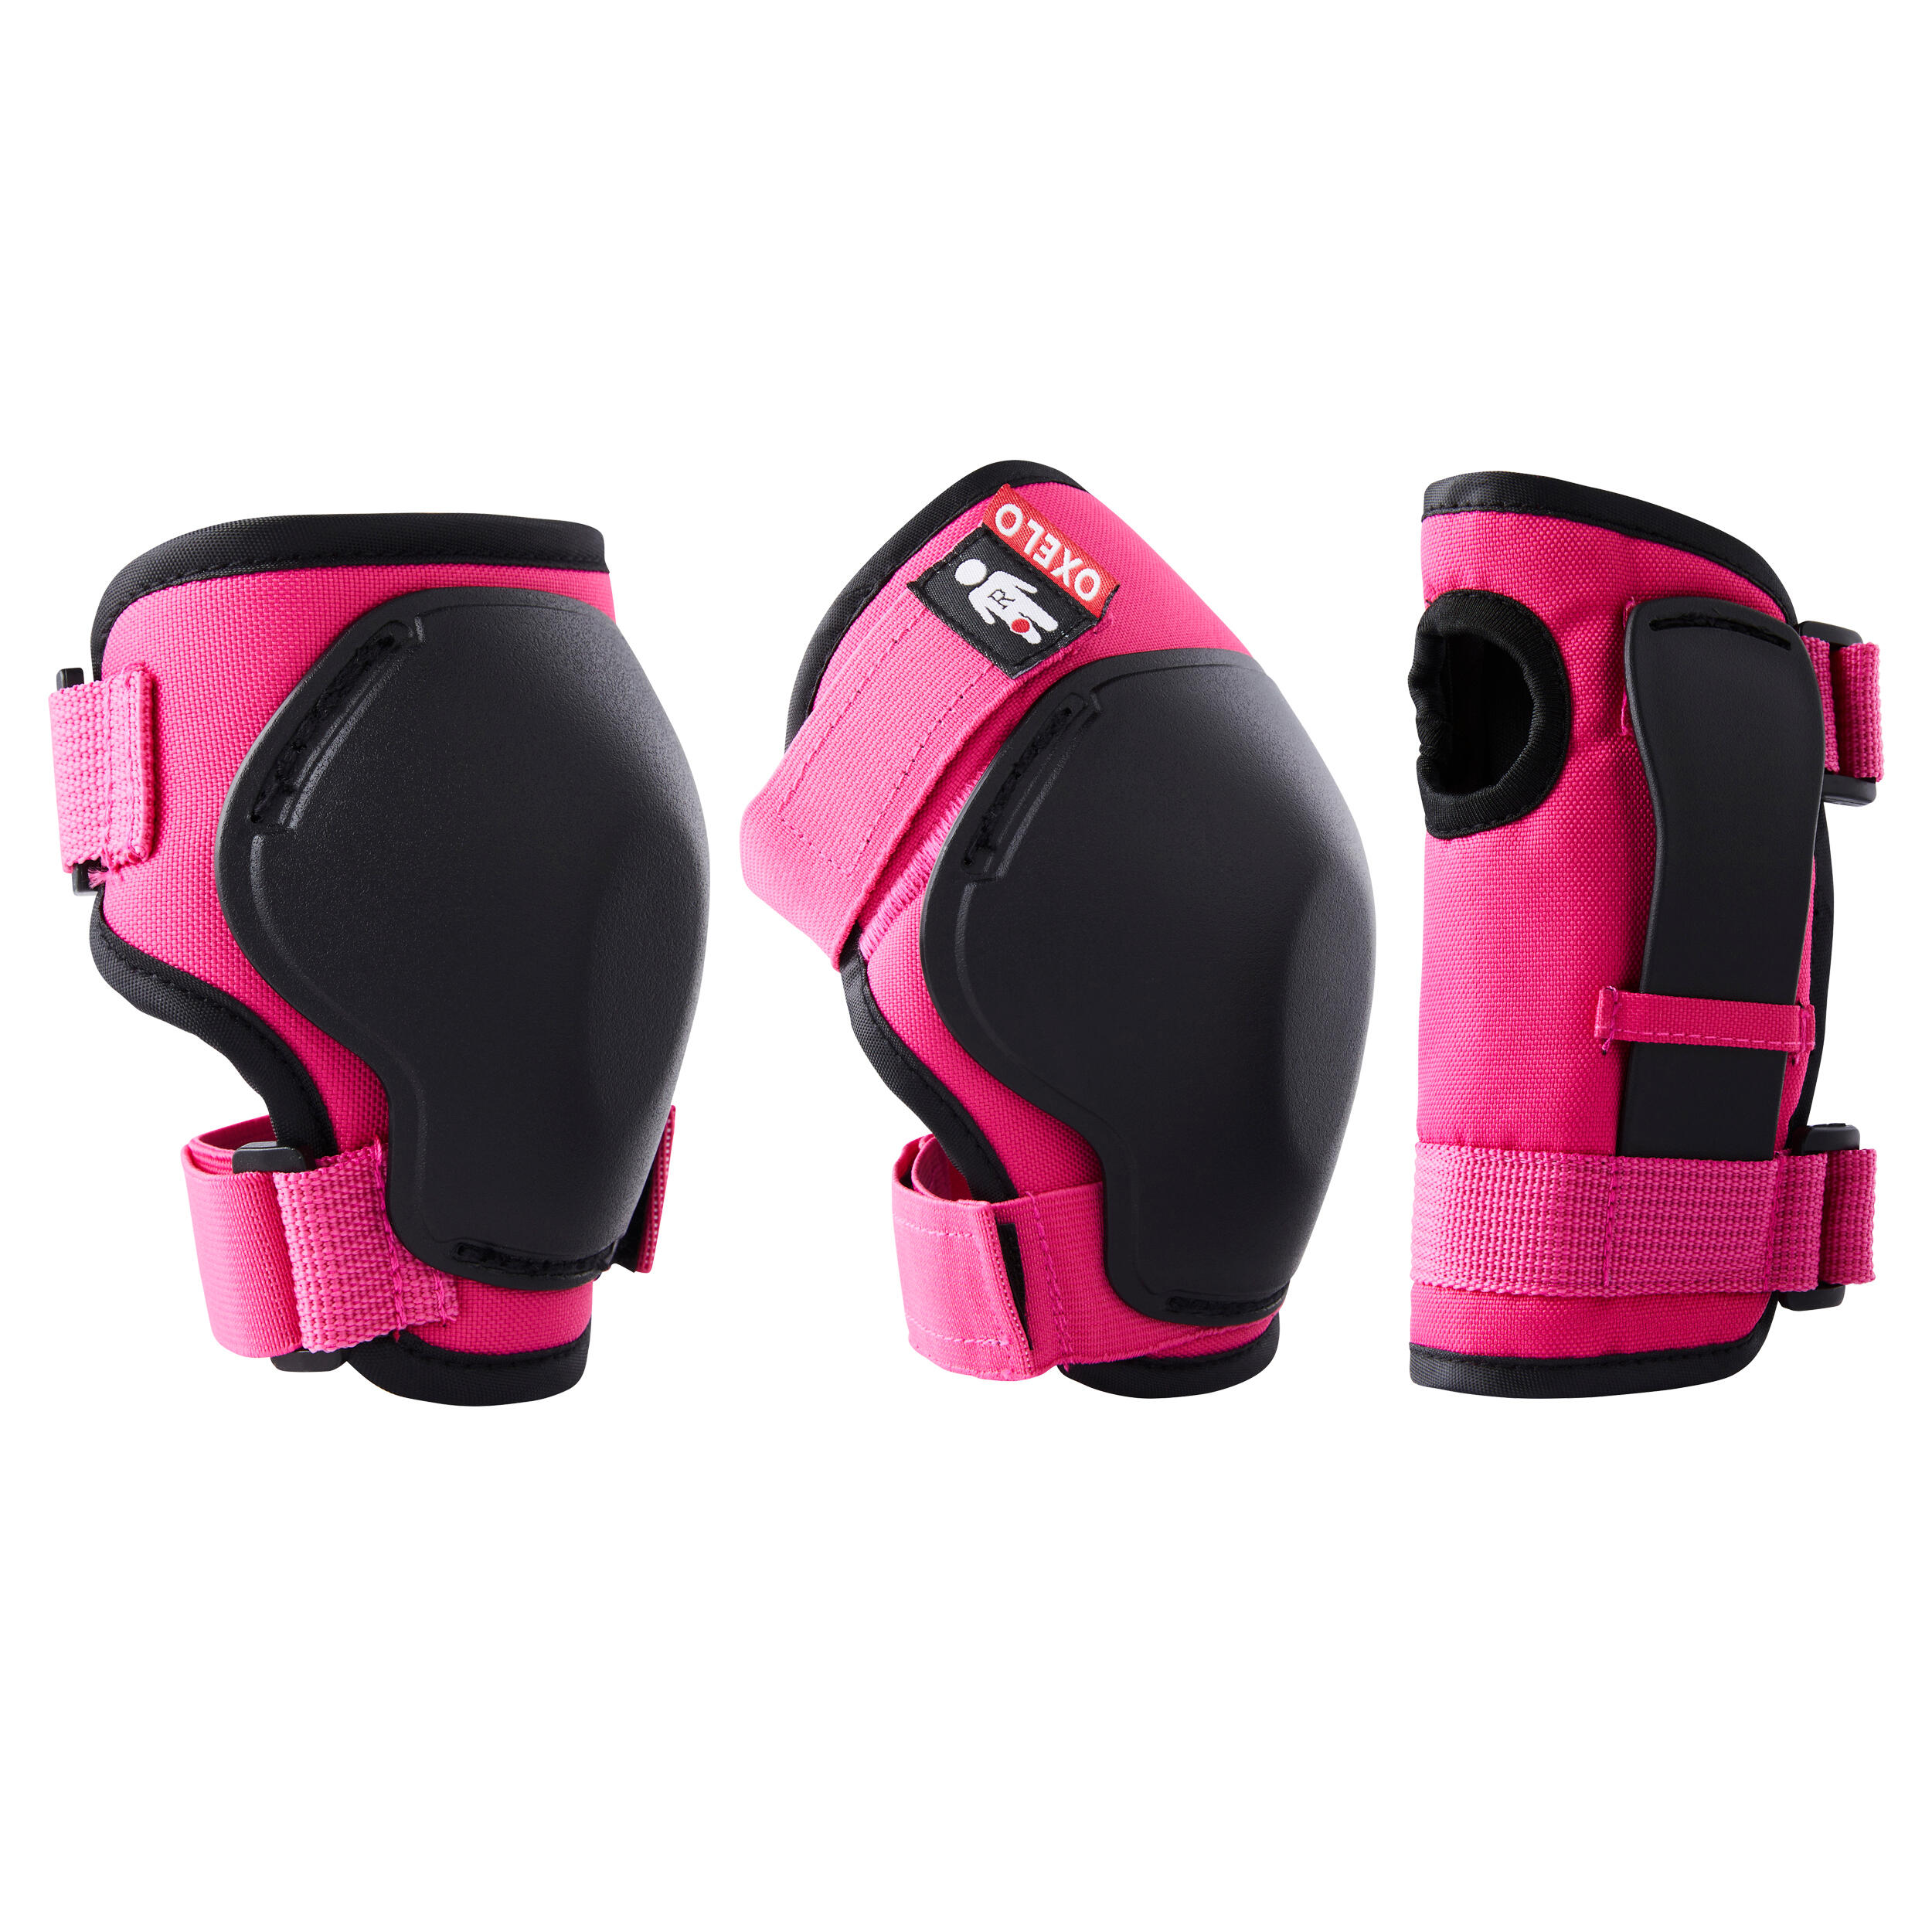 100 2 x 3-Piece Skating Skateboard Scooter Protective Gear Kids